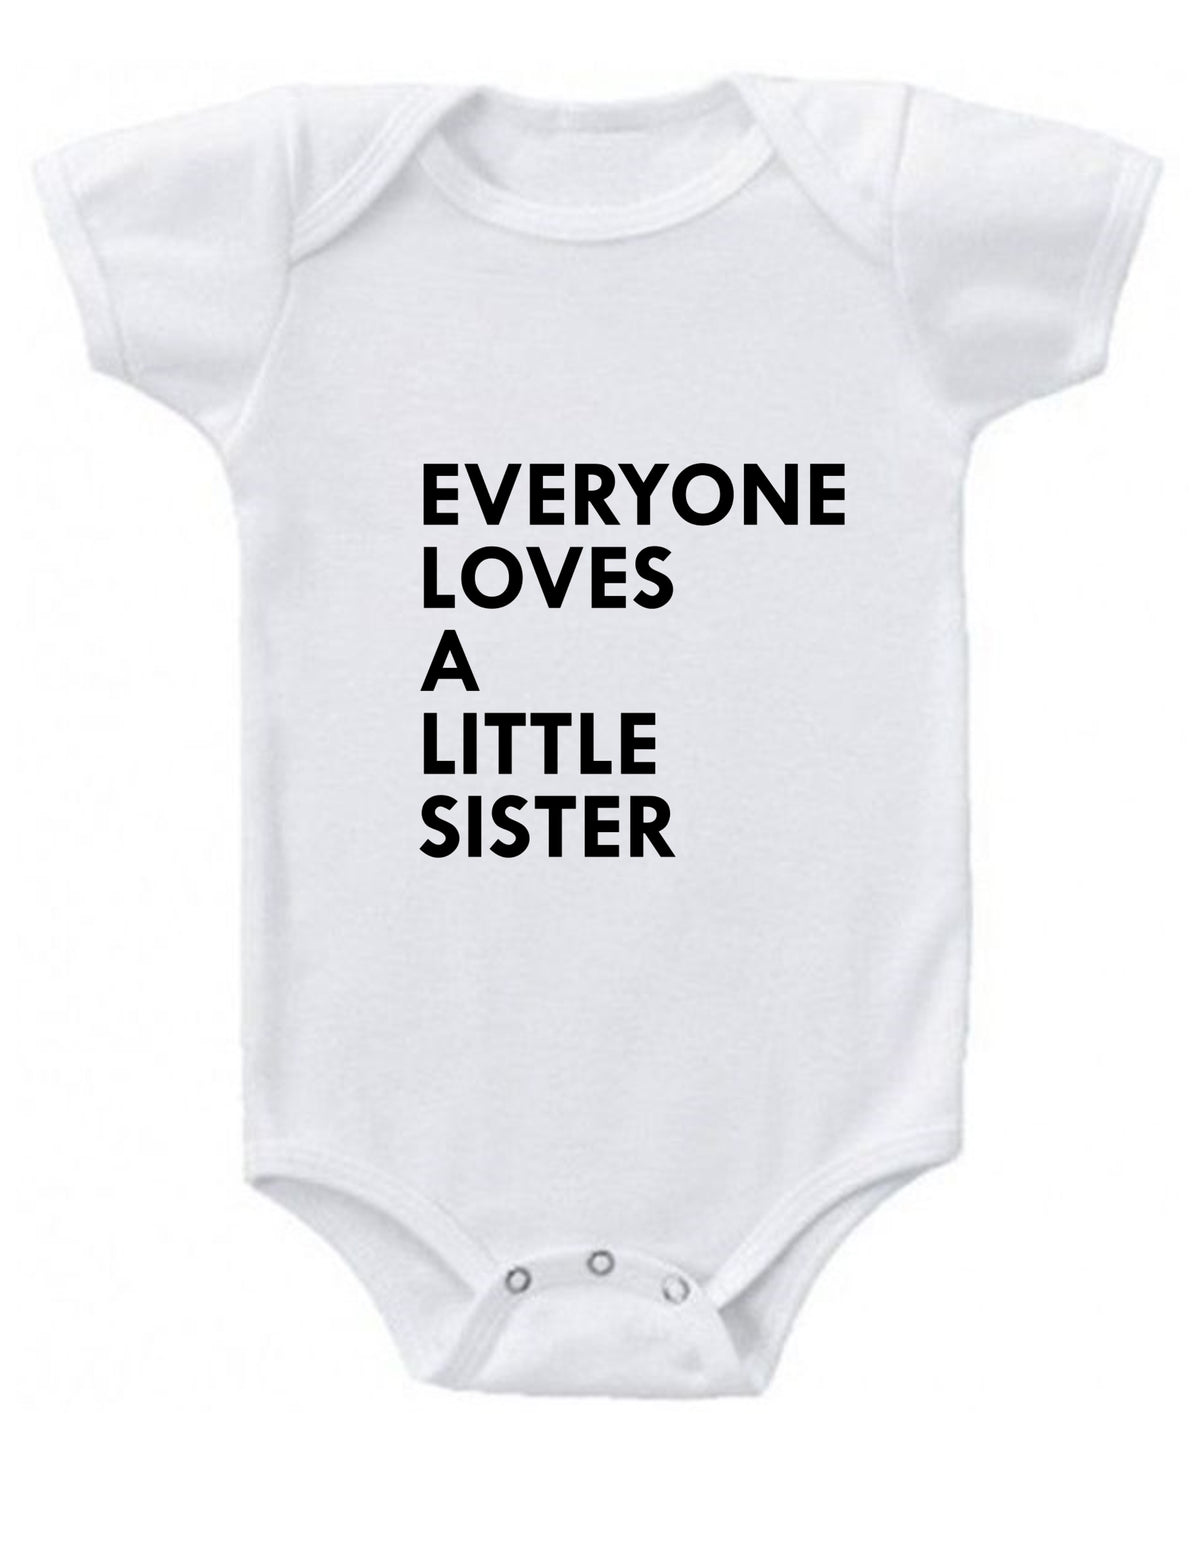 Everyone Loves a Little Sister Baby Onesie